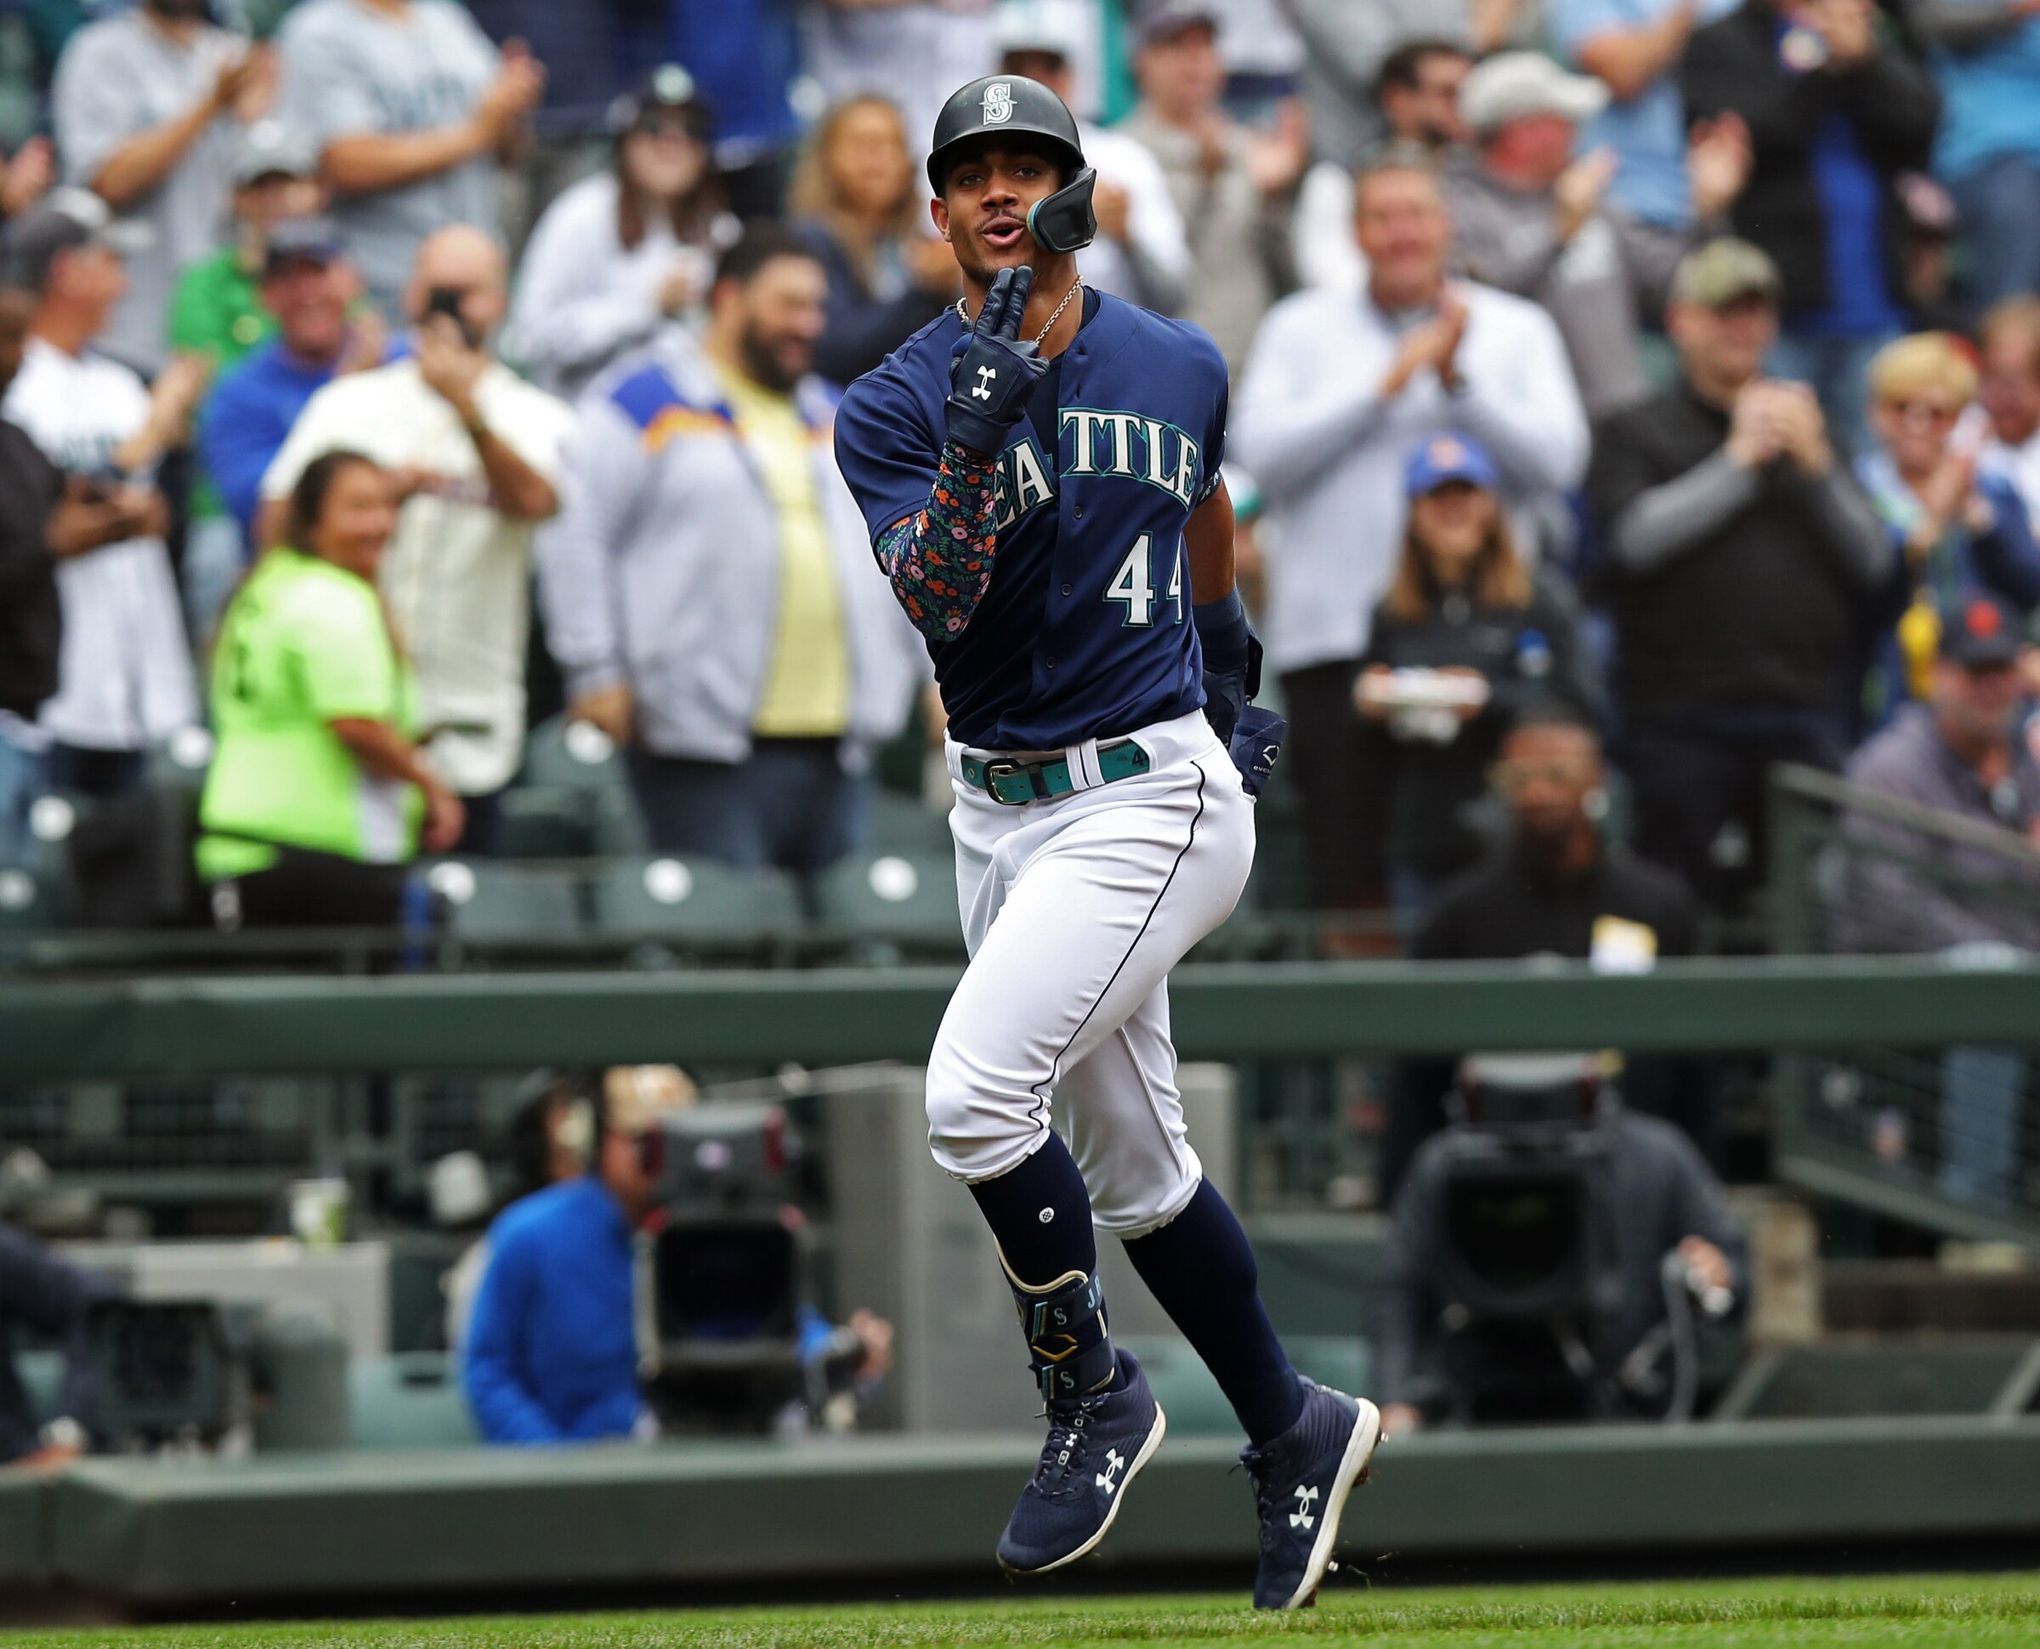 Mariners-Blue Jays GameCenter: Live updates, highlights, how to watch, stream Game 1 of wild card series